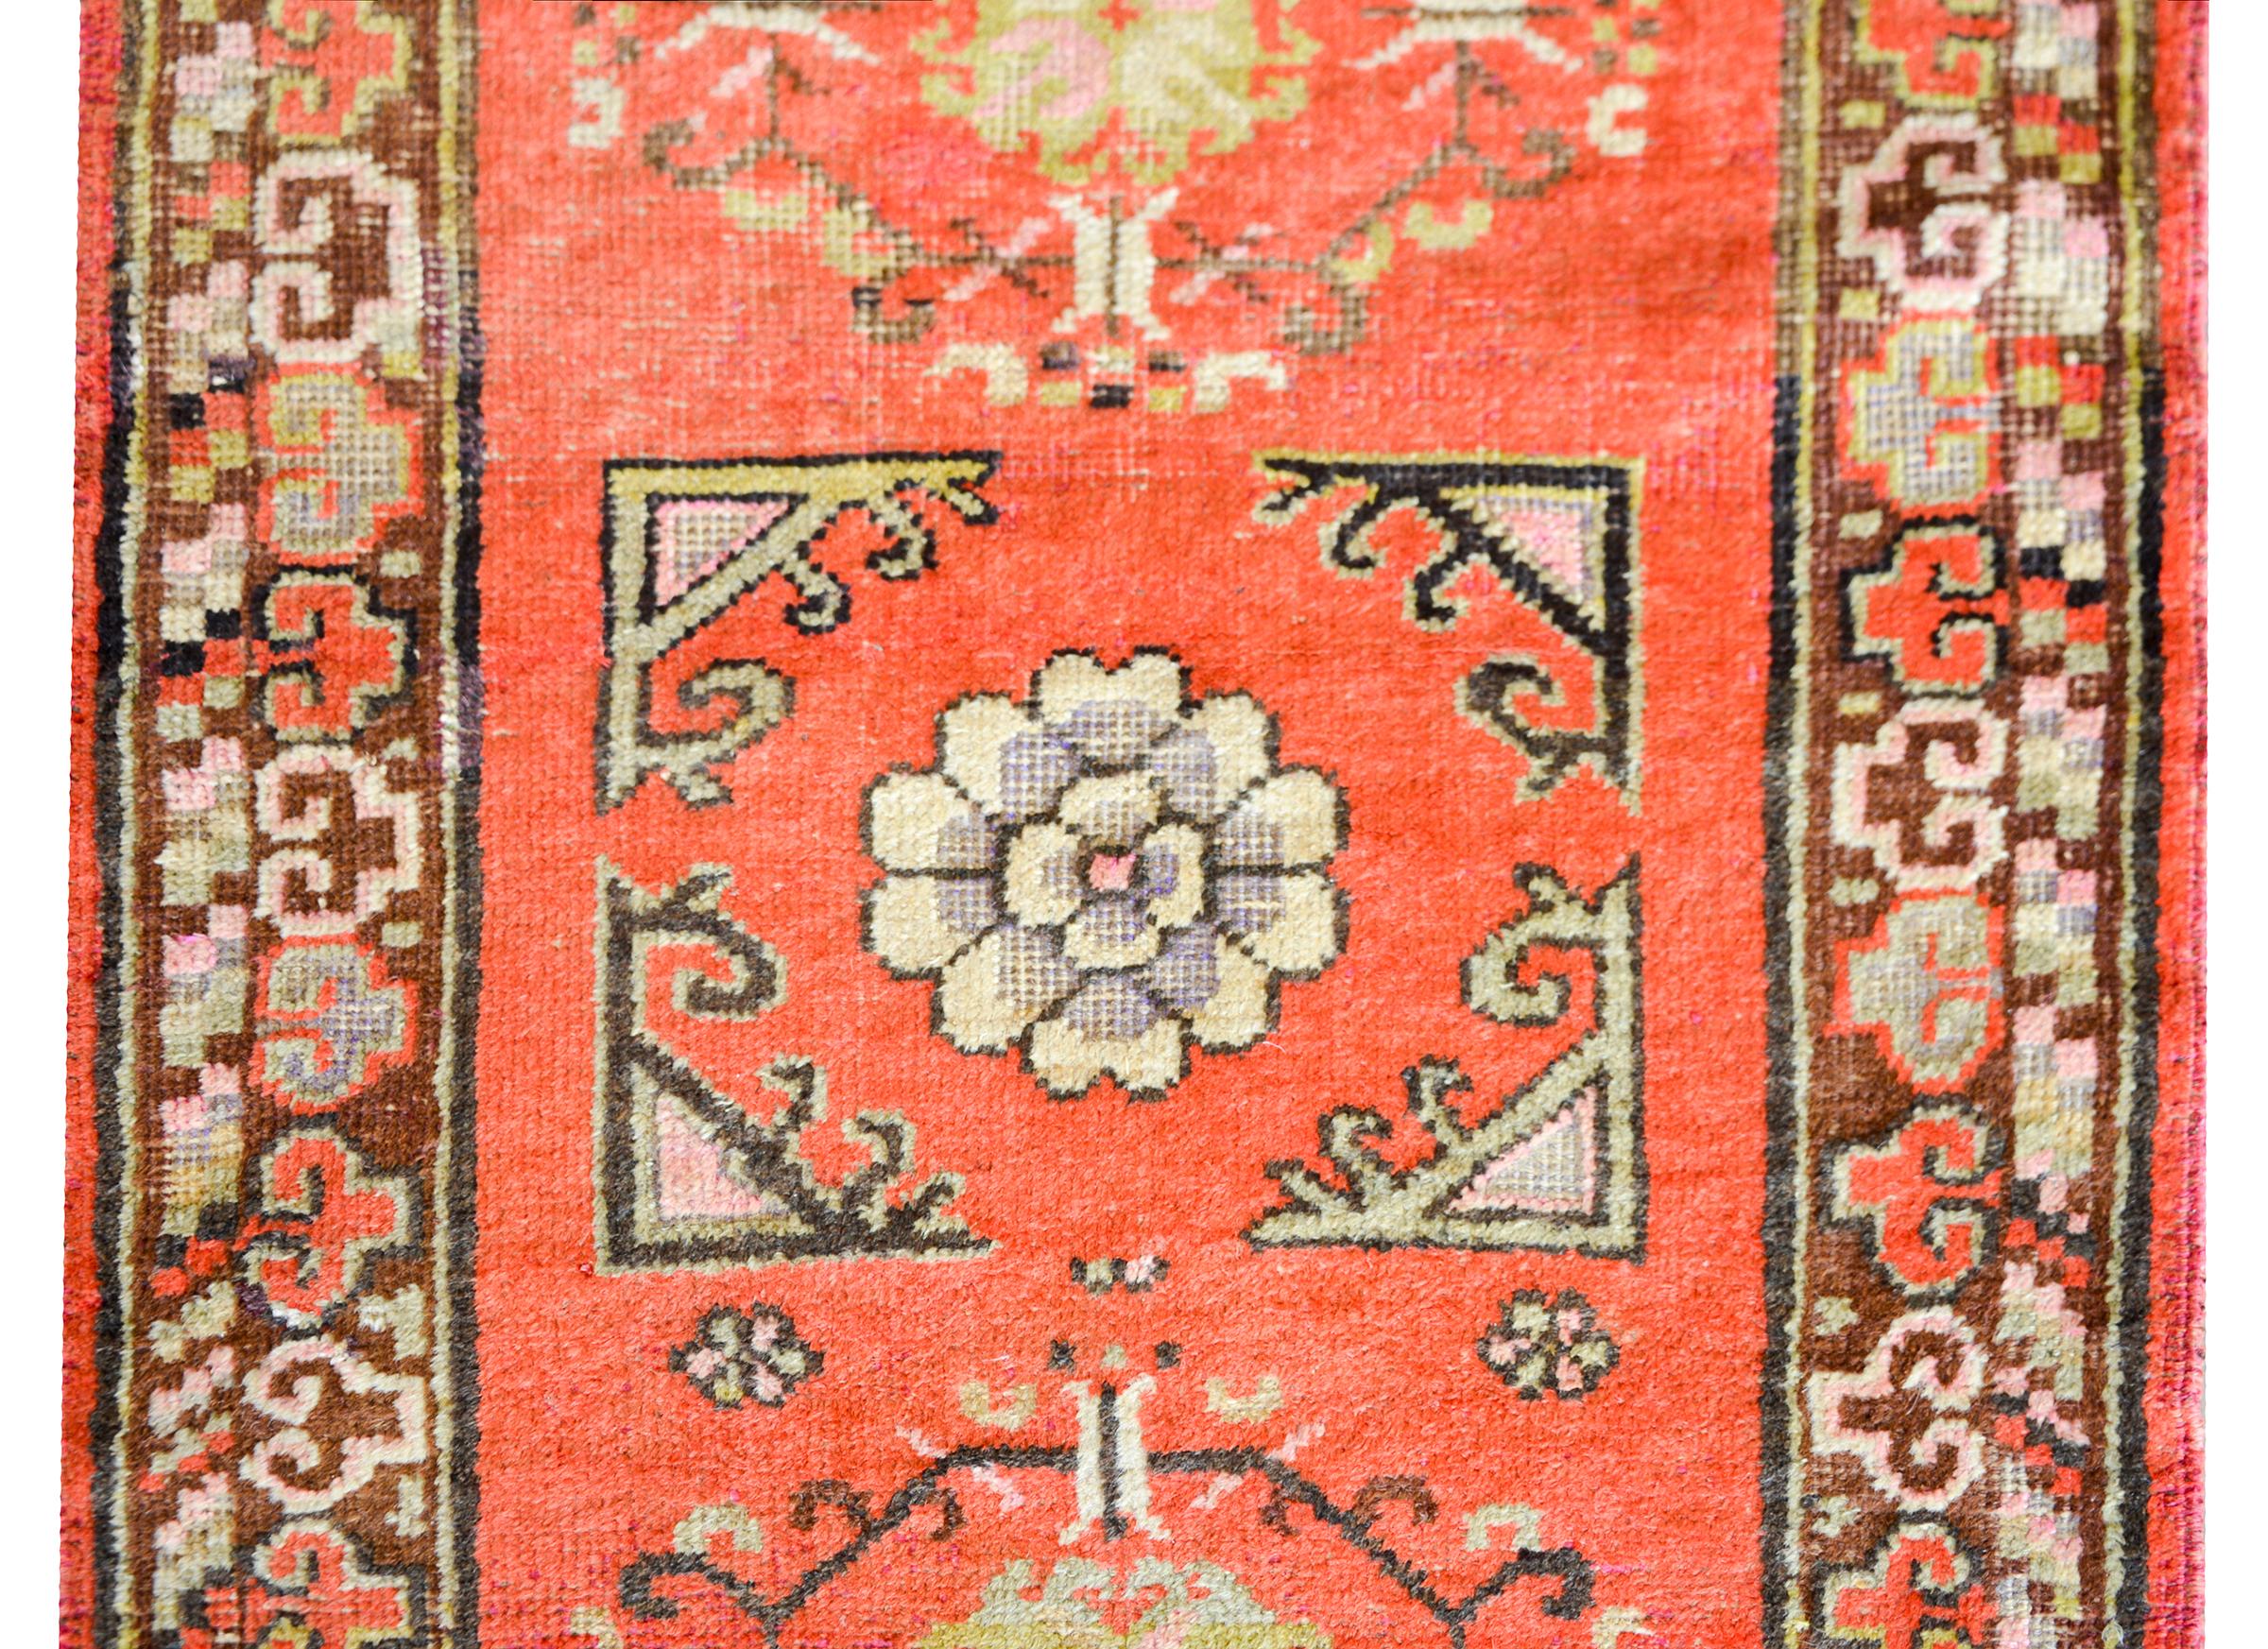 A beautiful early 20th century East Turkestan Khotan rug with several medallions with stylized flowers woven in muted colors inducing gold, crimson, pink, and brown against a coral colored background, and surrounded by a border with a stylized